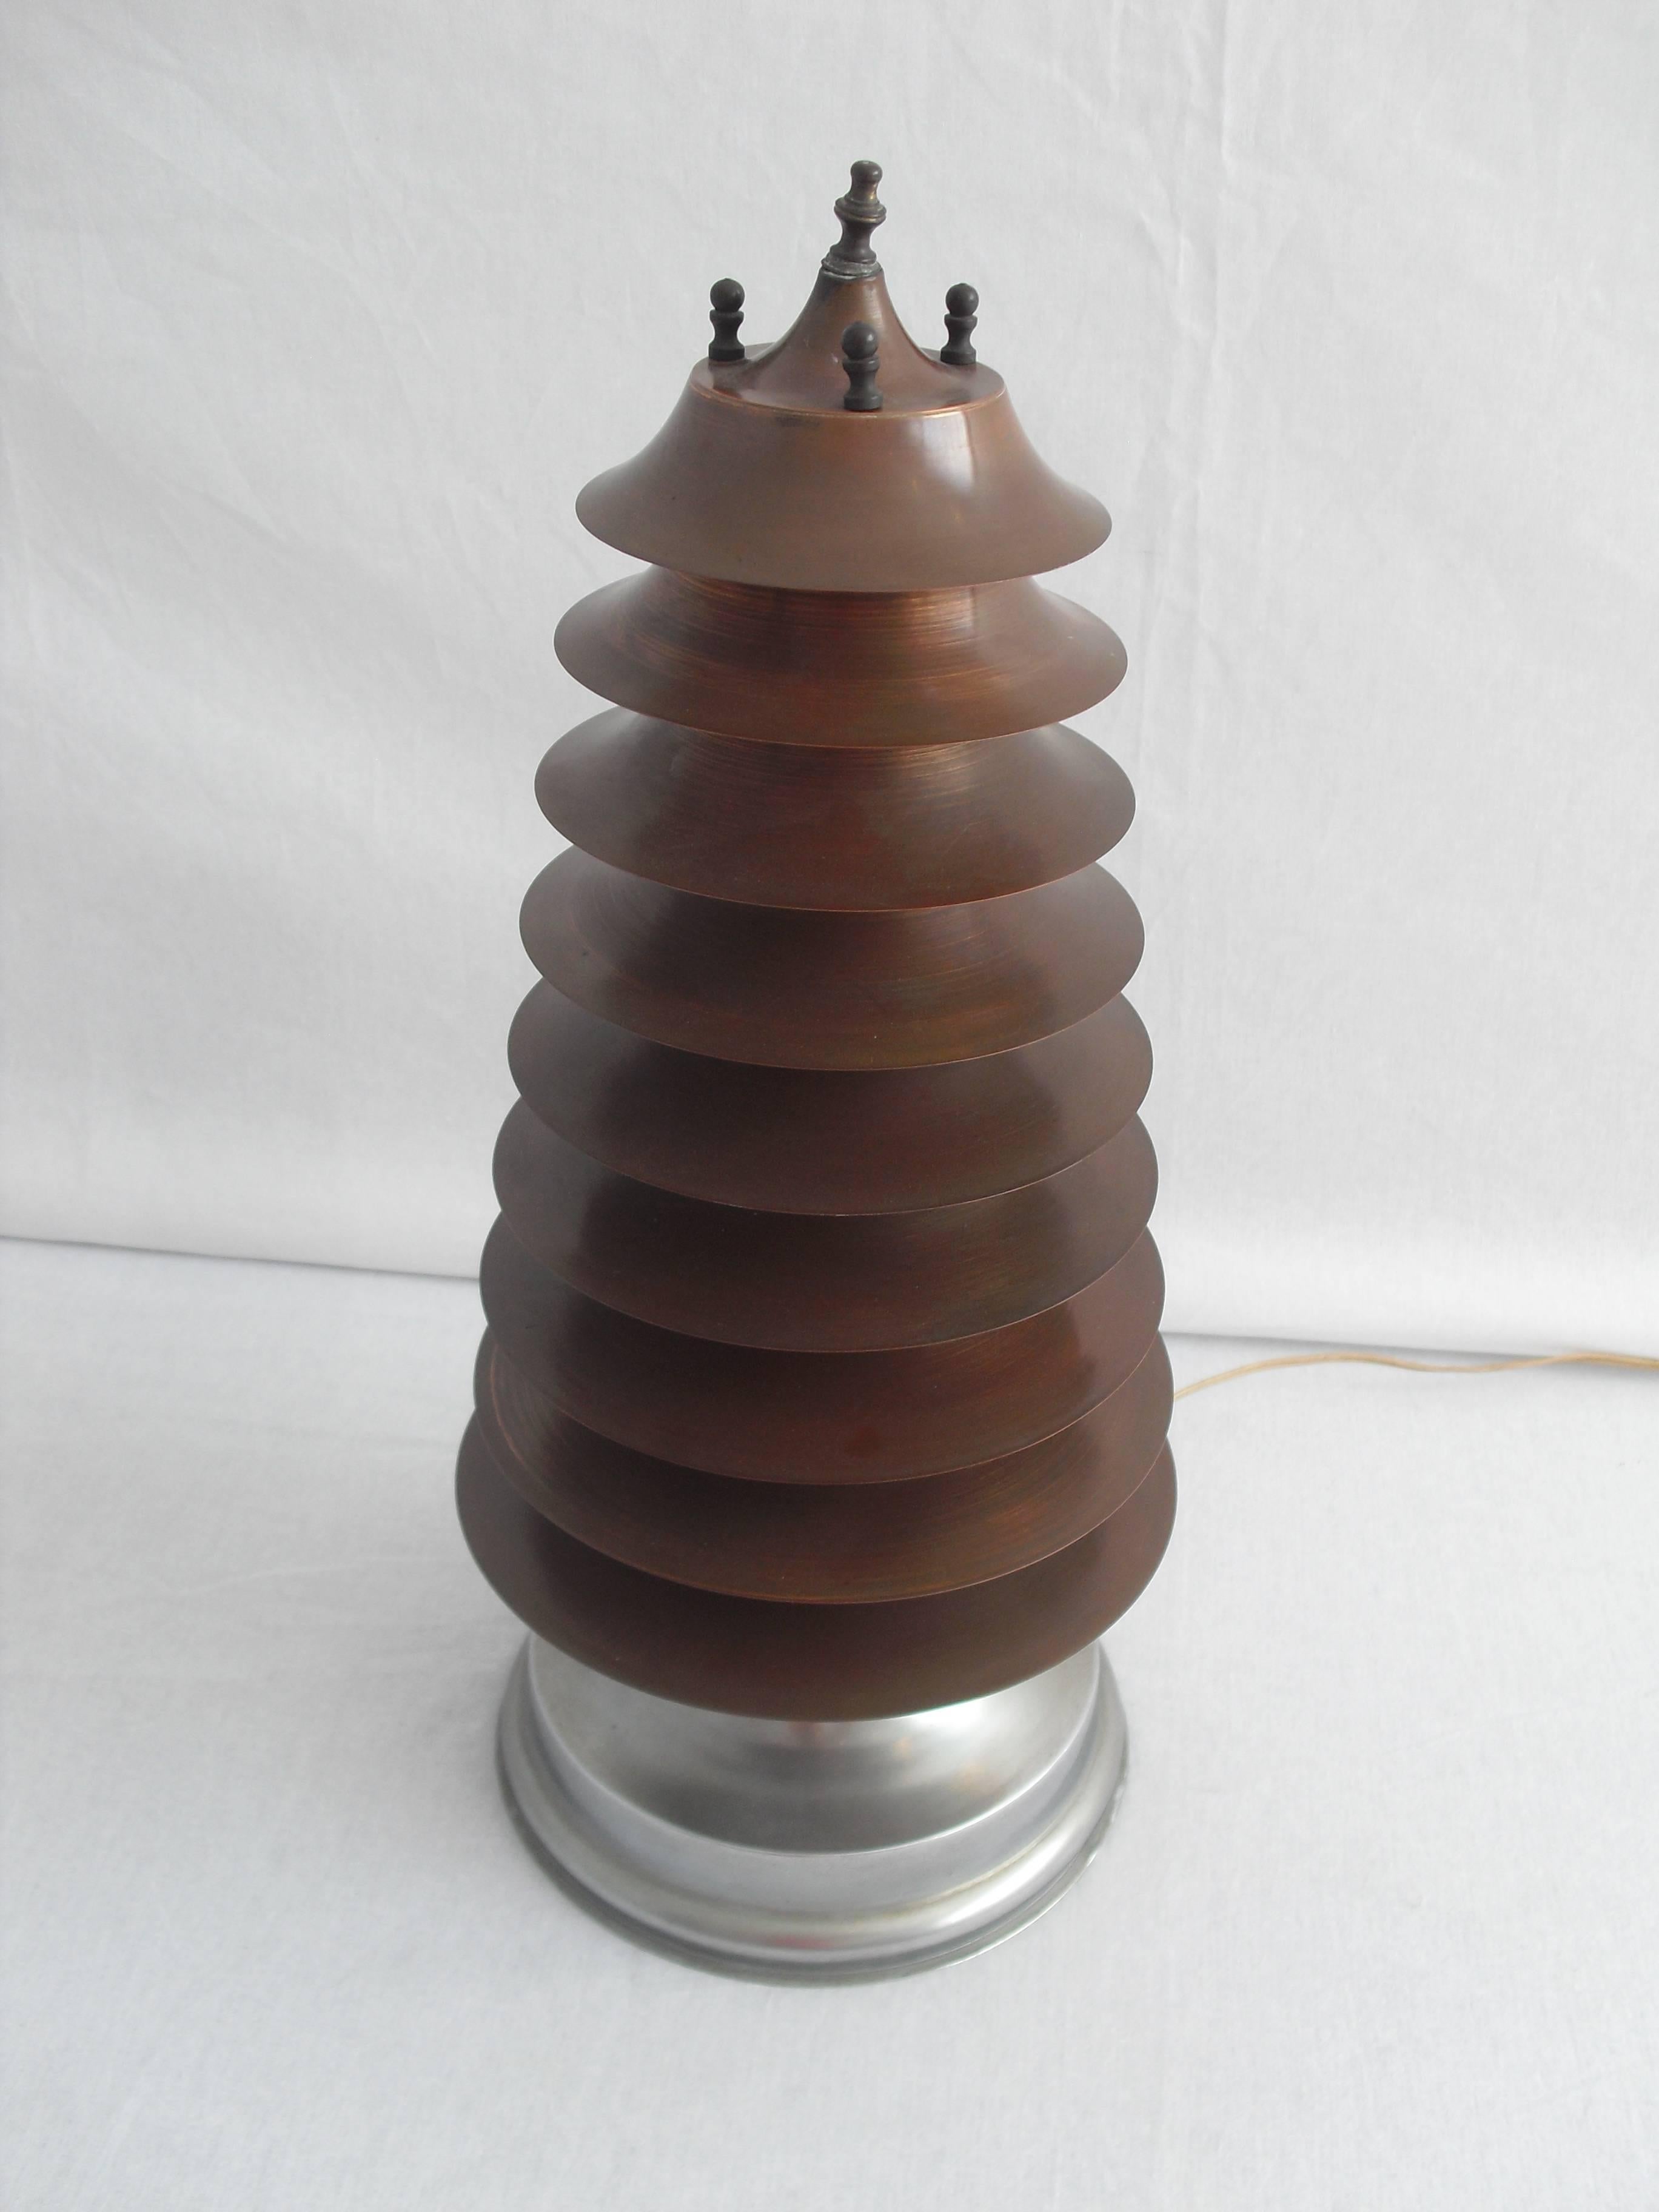 This very rare nine-tier large copper table lamp is made during the Art-Deco period.

The only information we have about it, is that it came from an old couple who collected all kinds of design furniture and art, from all over the world.

We